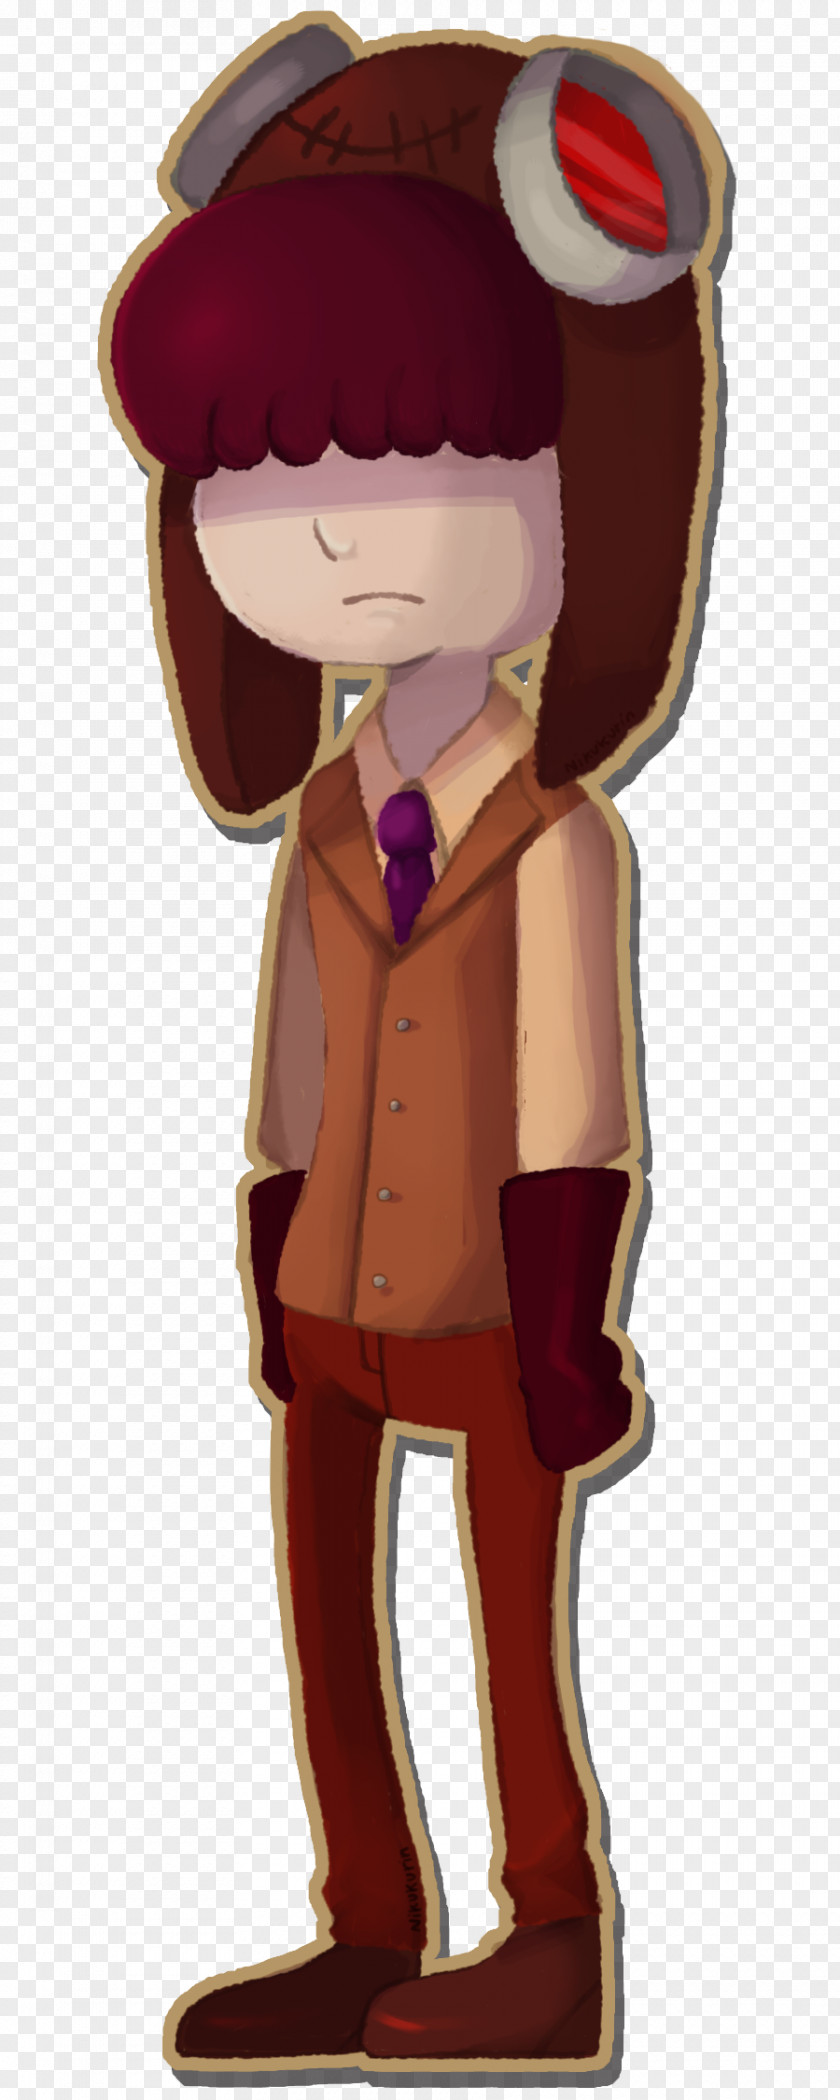 Unfairly Prosecuted Persons Day Cartoon Maroon Figurine Character PNG